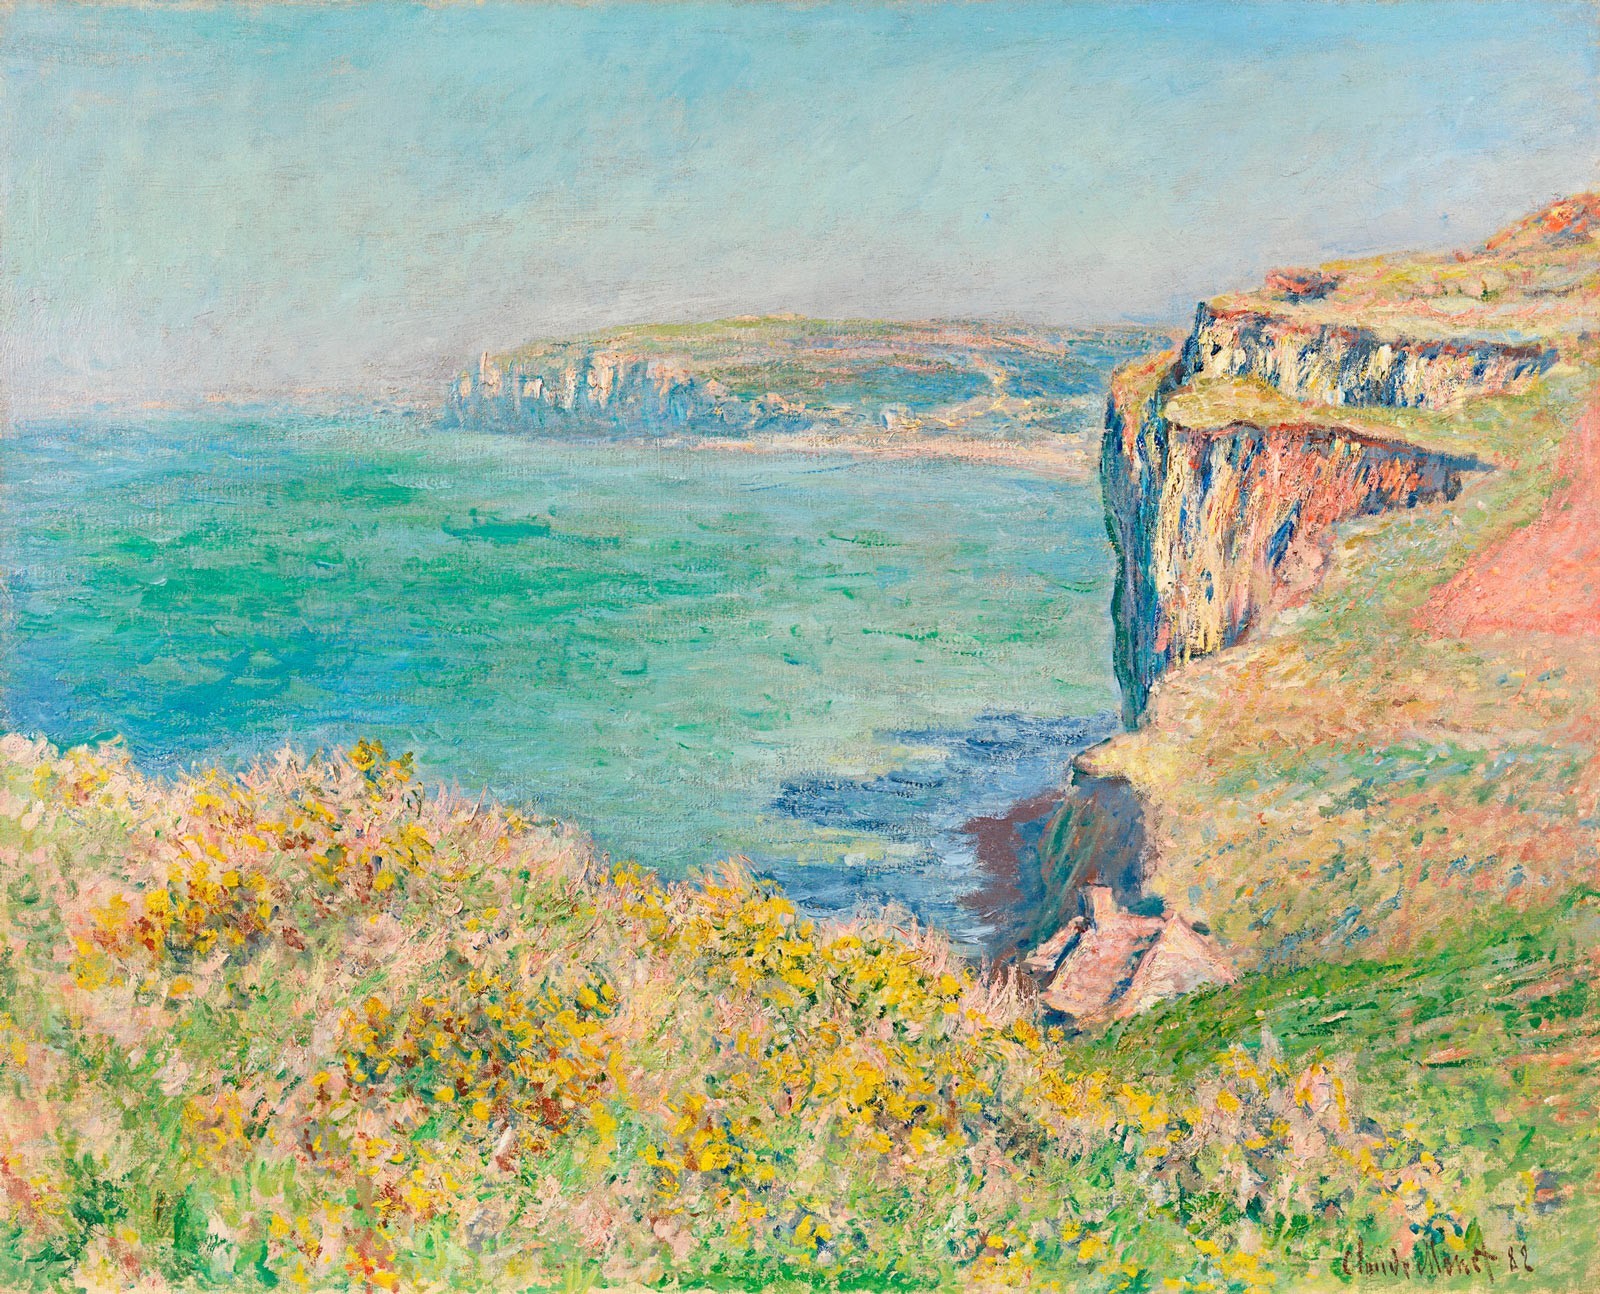 Normandy scene on loan to the National Gallery, London’s exhibition Monet and Architecture